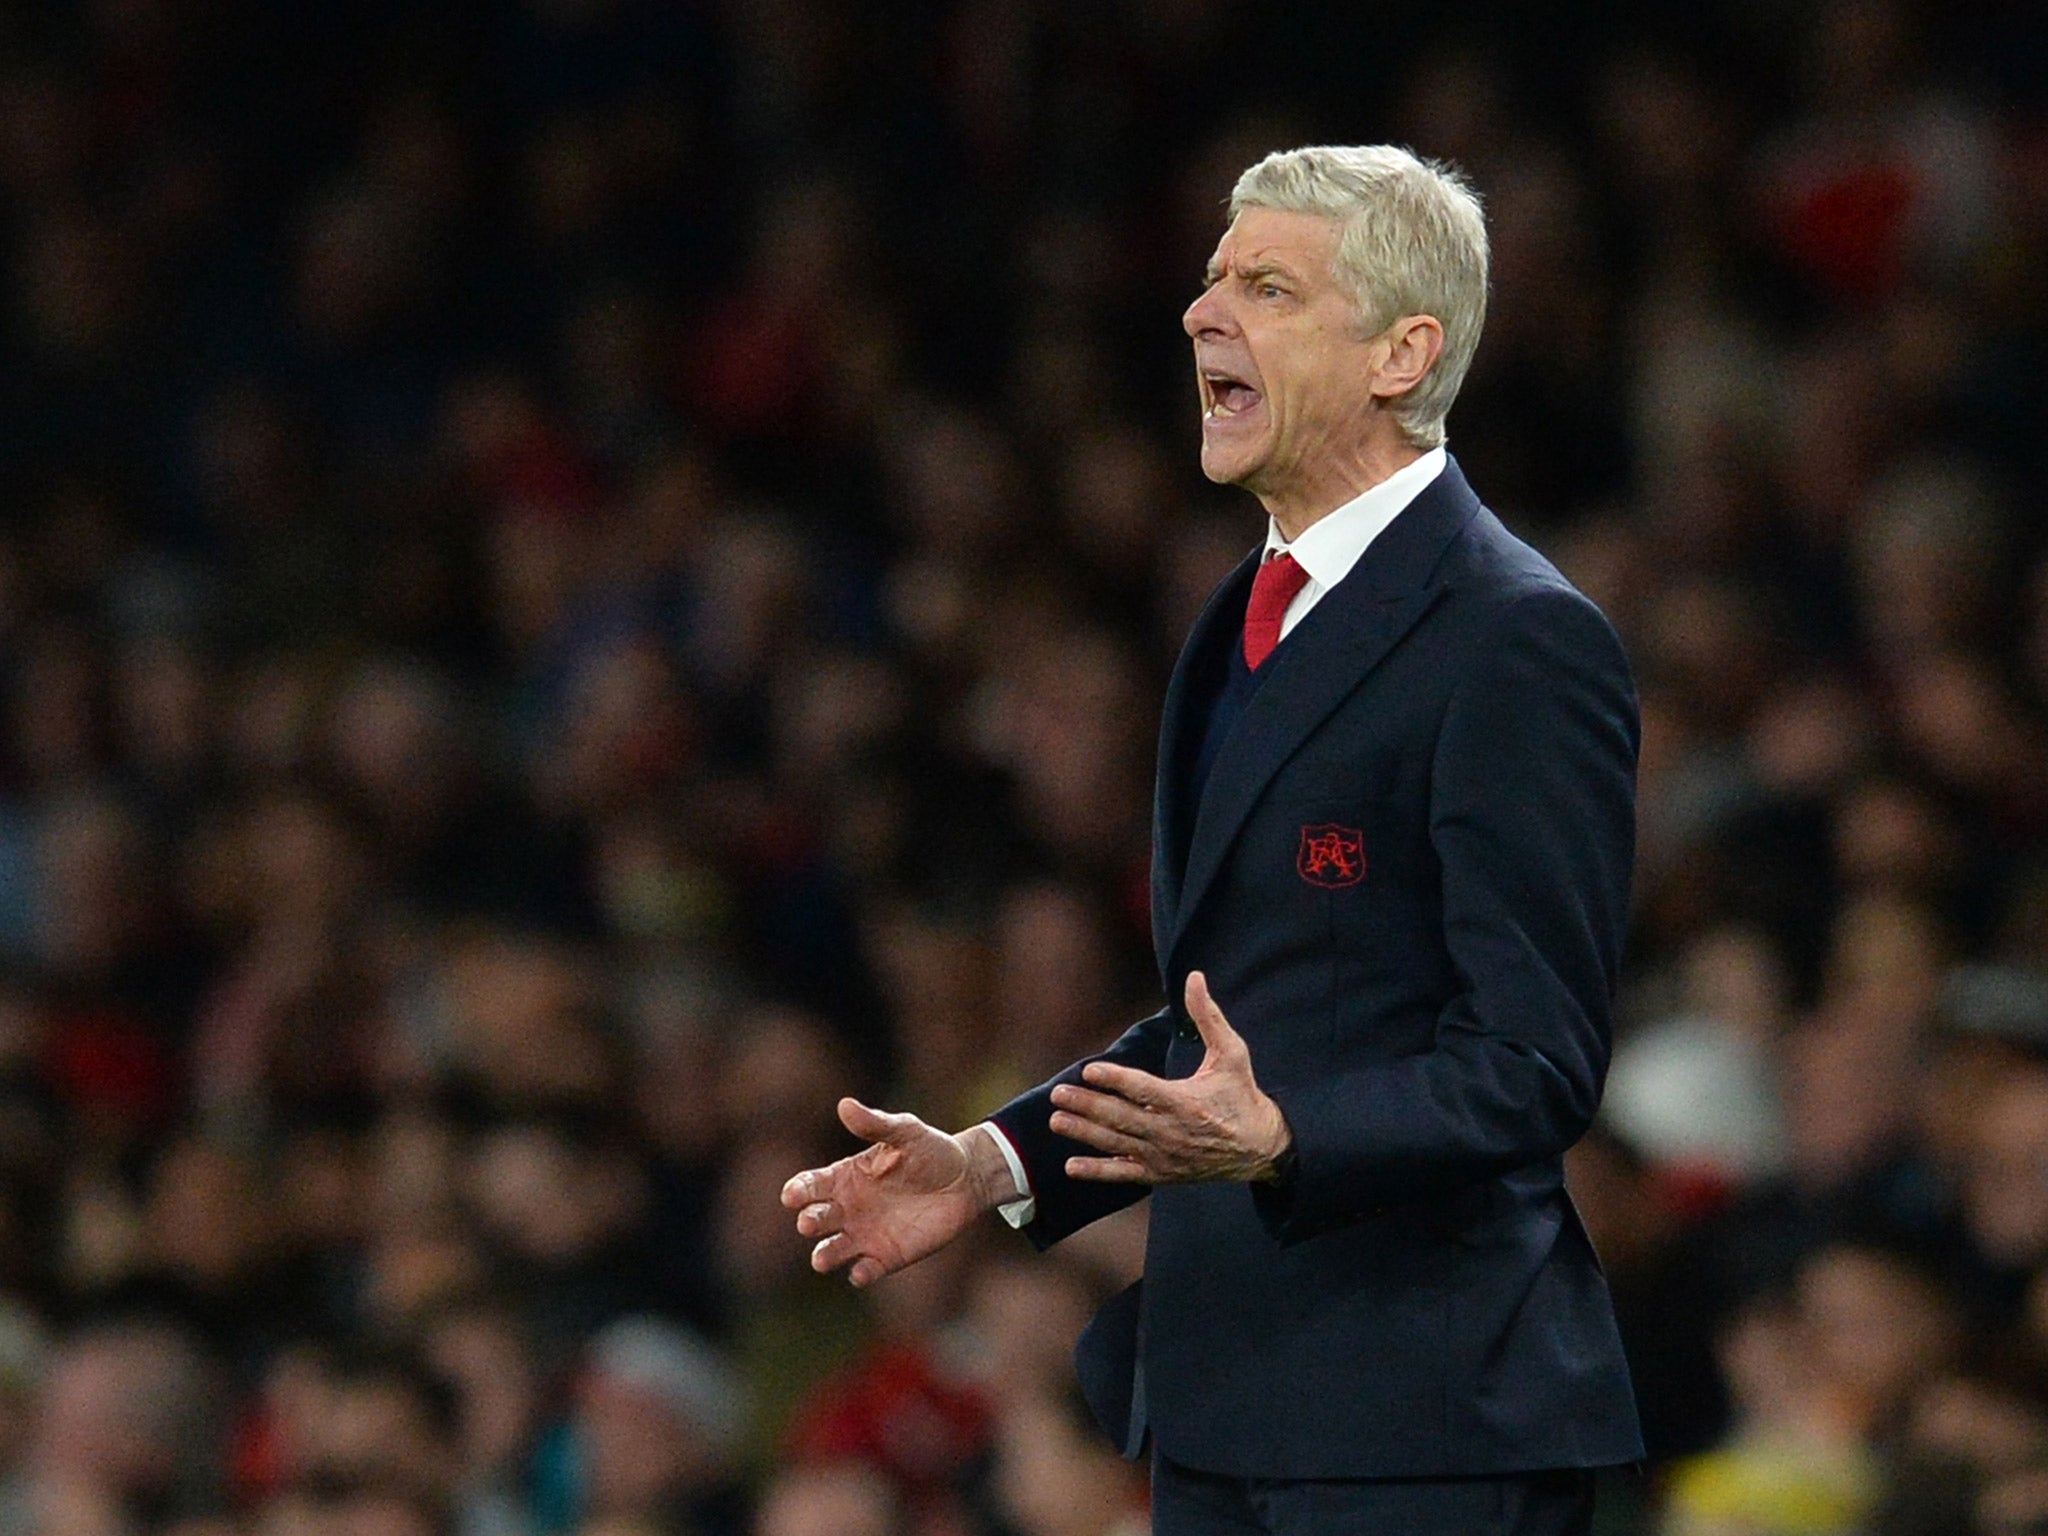 Arsene Wenger has divided Arsenal fans in recent seasons but remains an attractive option for England